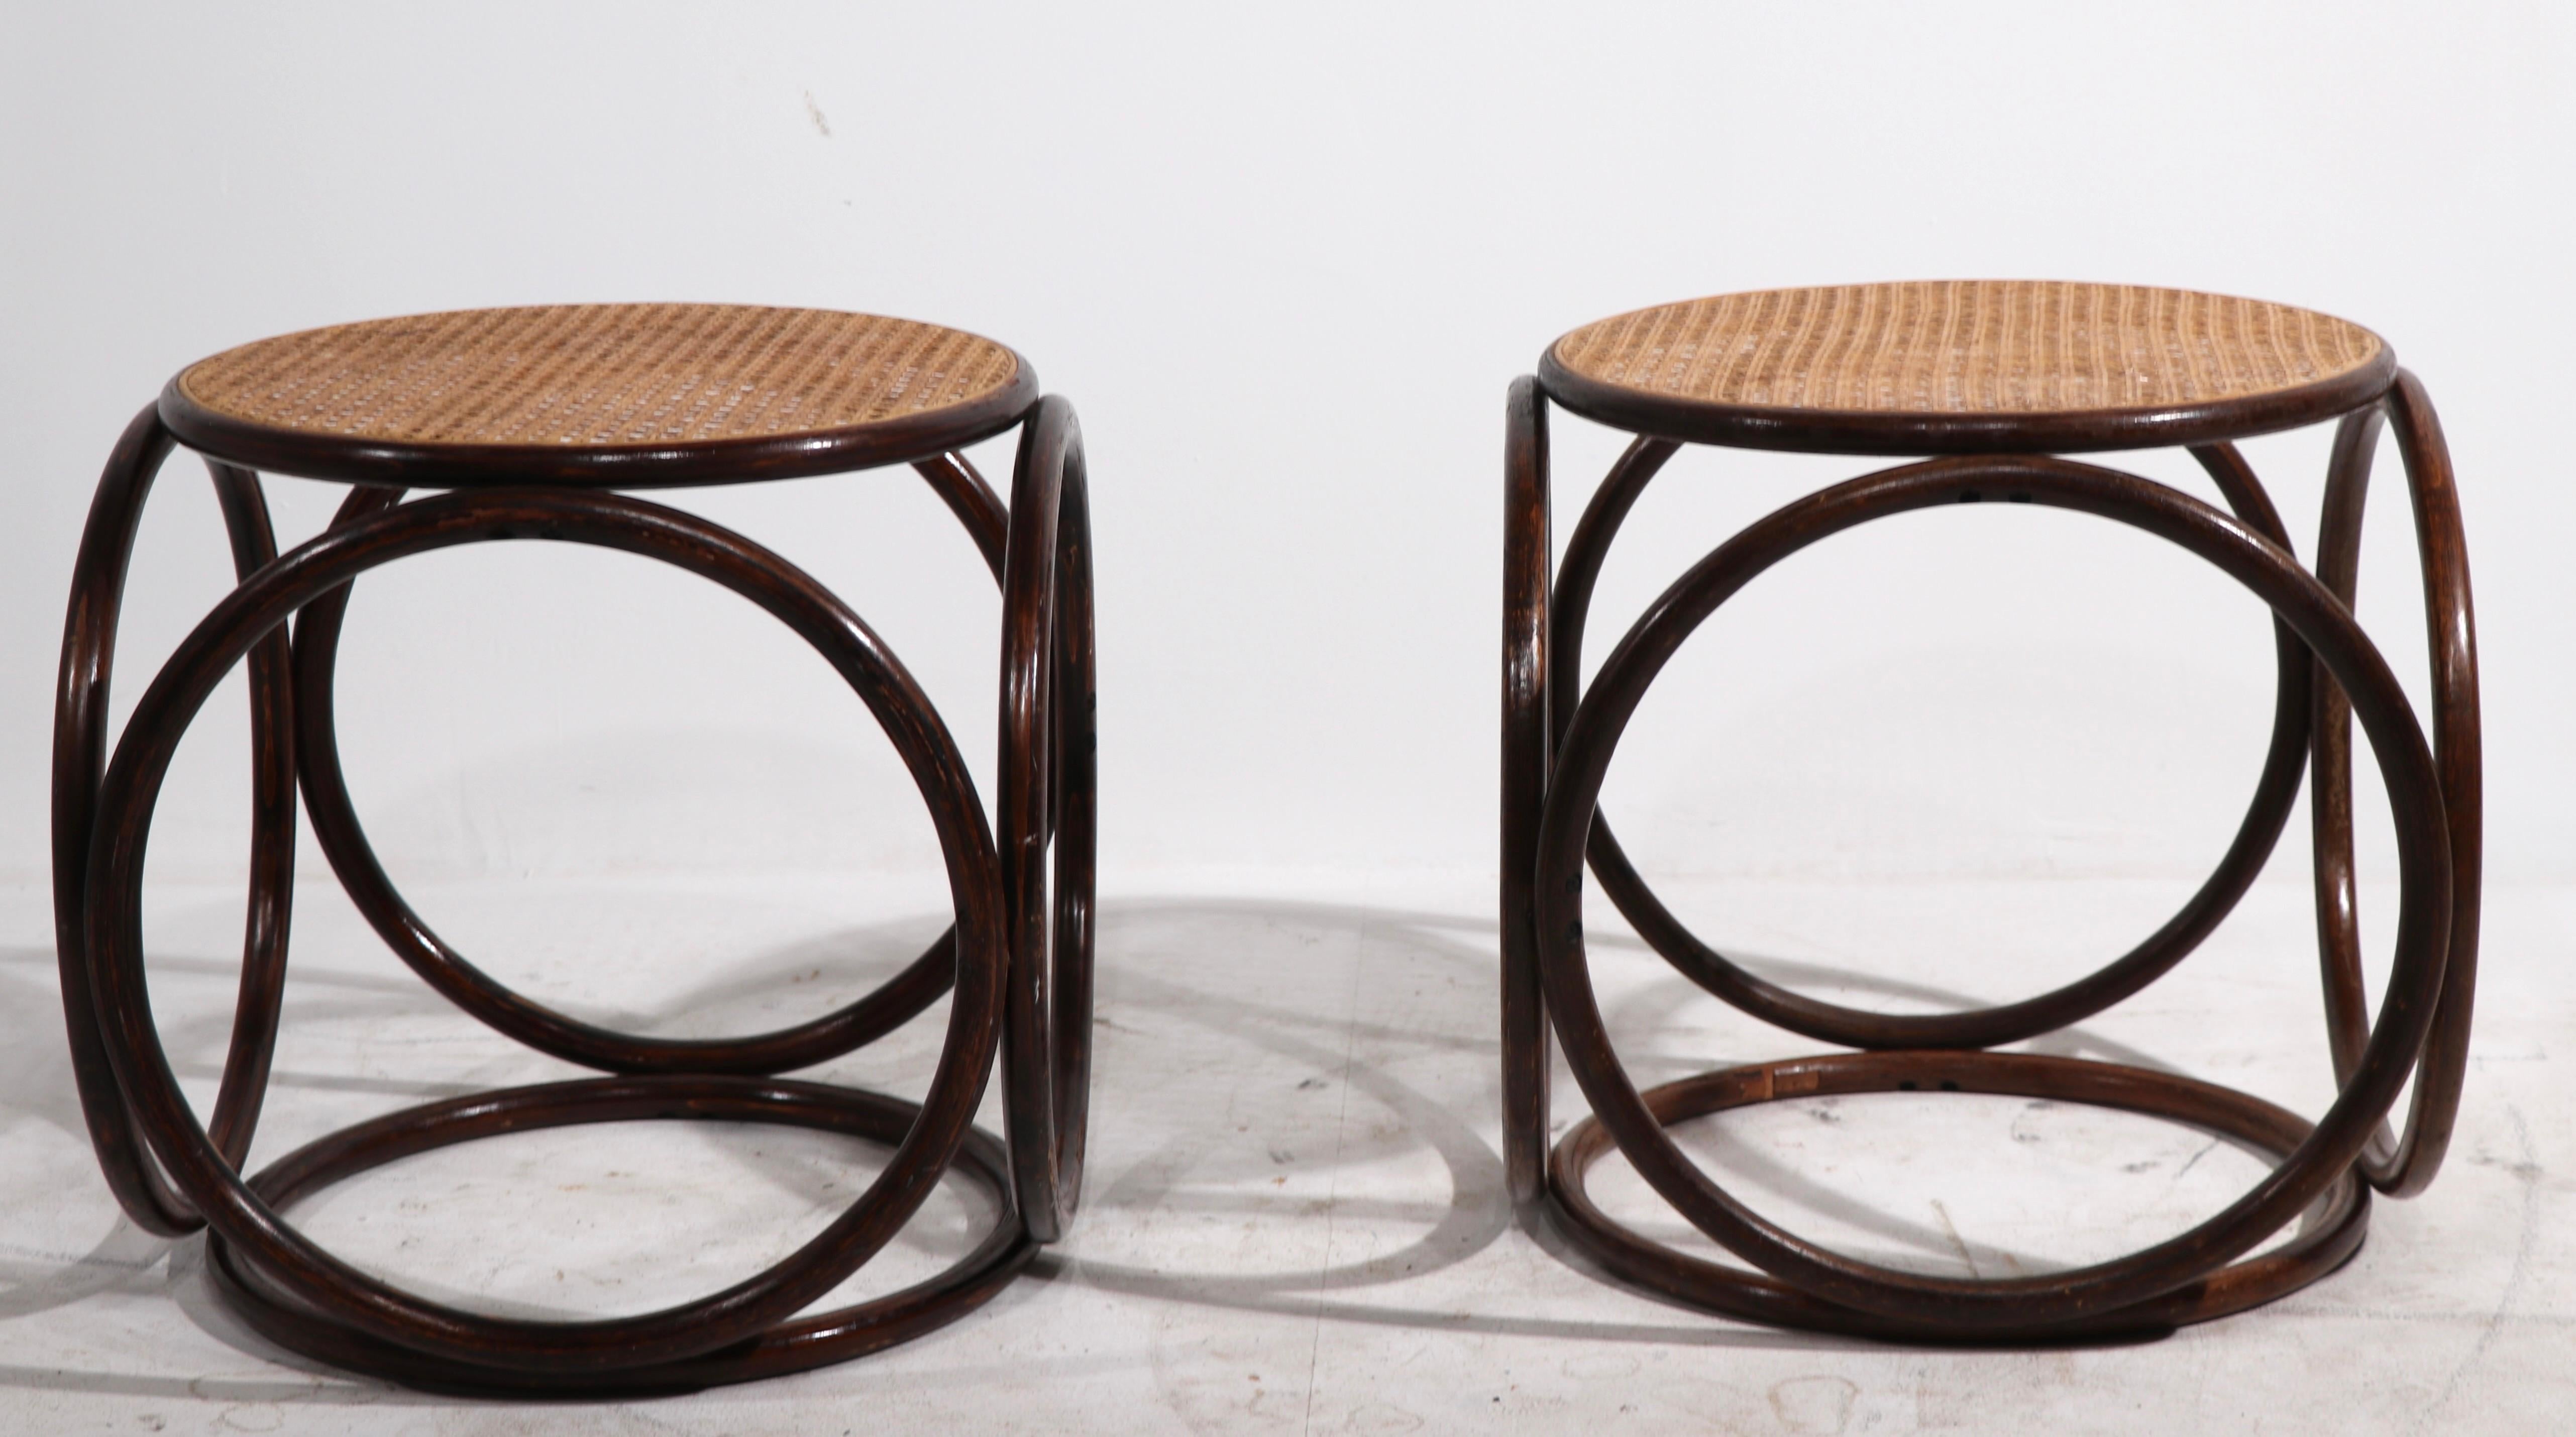 Pair of iconic Thonet bentwood and caned stools, by Thonet. Unusual to find these as in pairs, both are in good original condition showing only light cosmetic wear normal and consistent with age. Priced and offered as a pair.
 